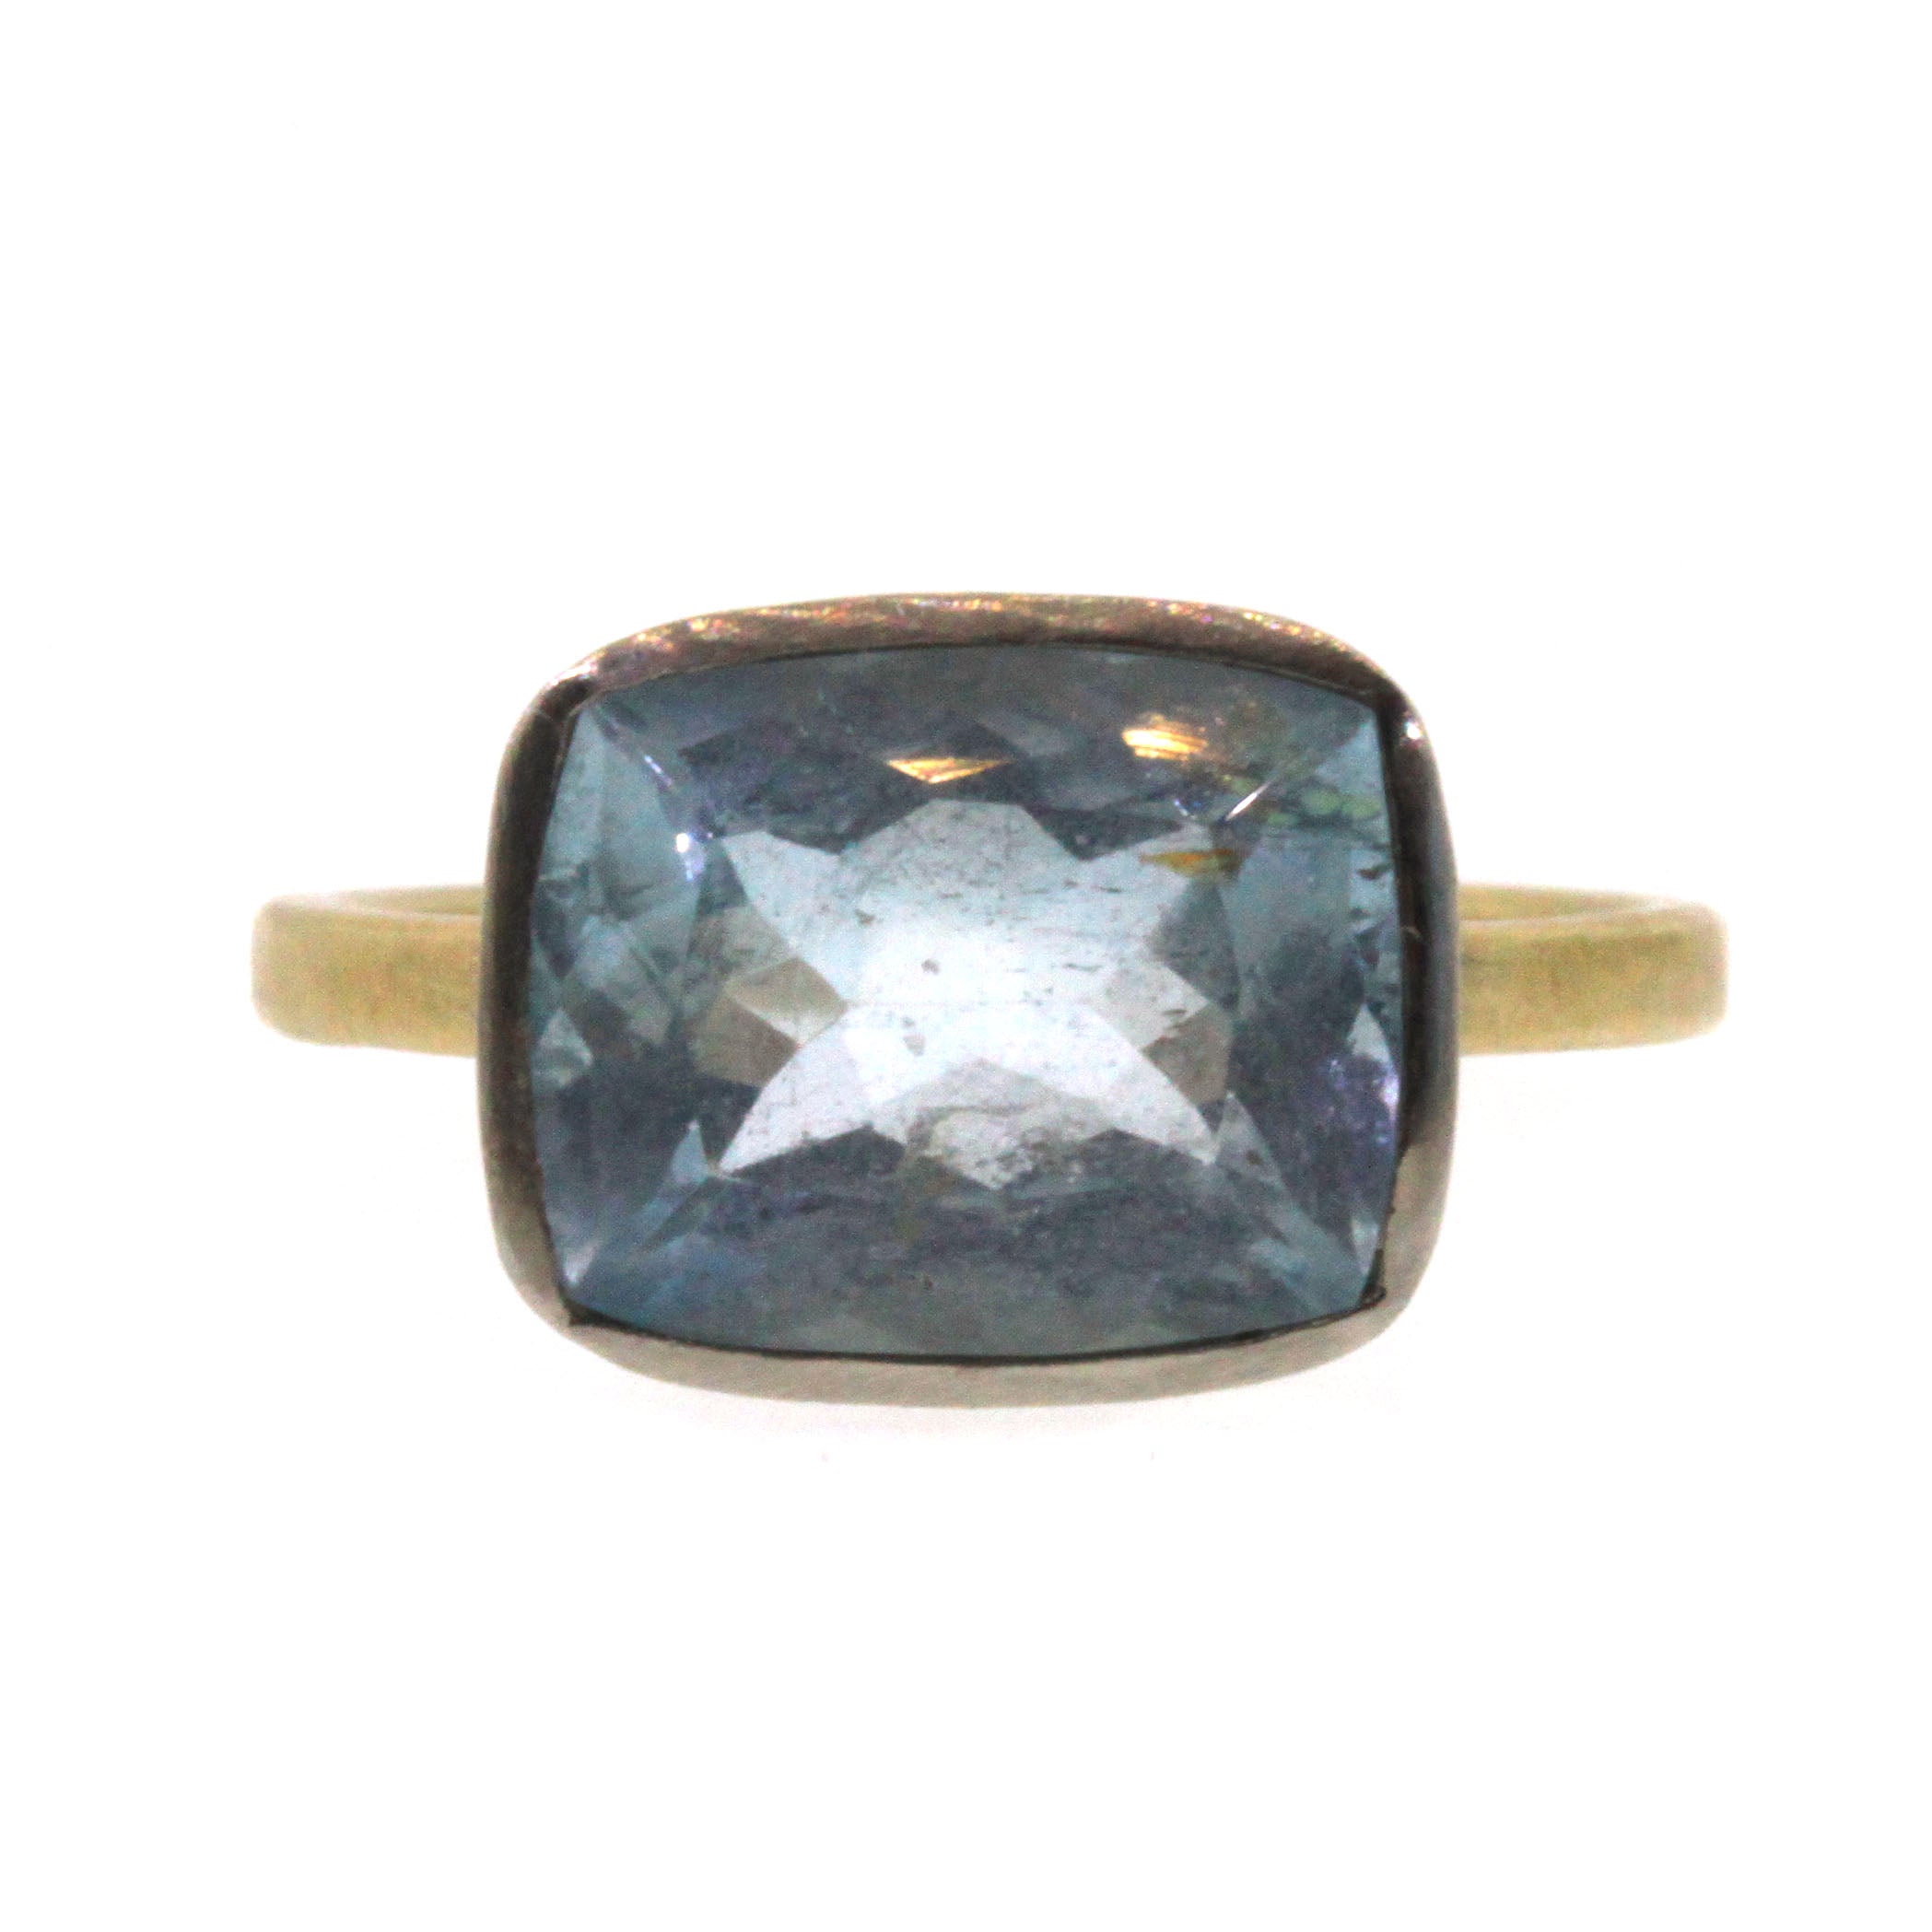 This Cushion Aquamarine Ring was handcrafted by Rebecca Lankford. It features a brilliant, blue aquamarine bezel set in white gold and soldered into a textured yellow gold band. 